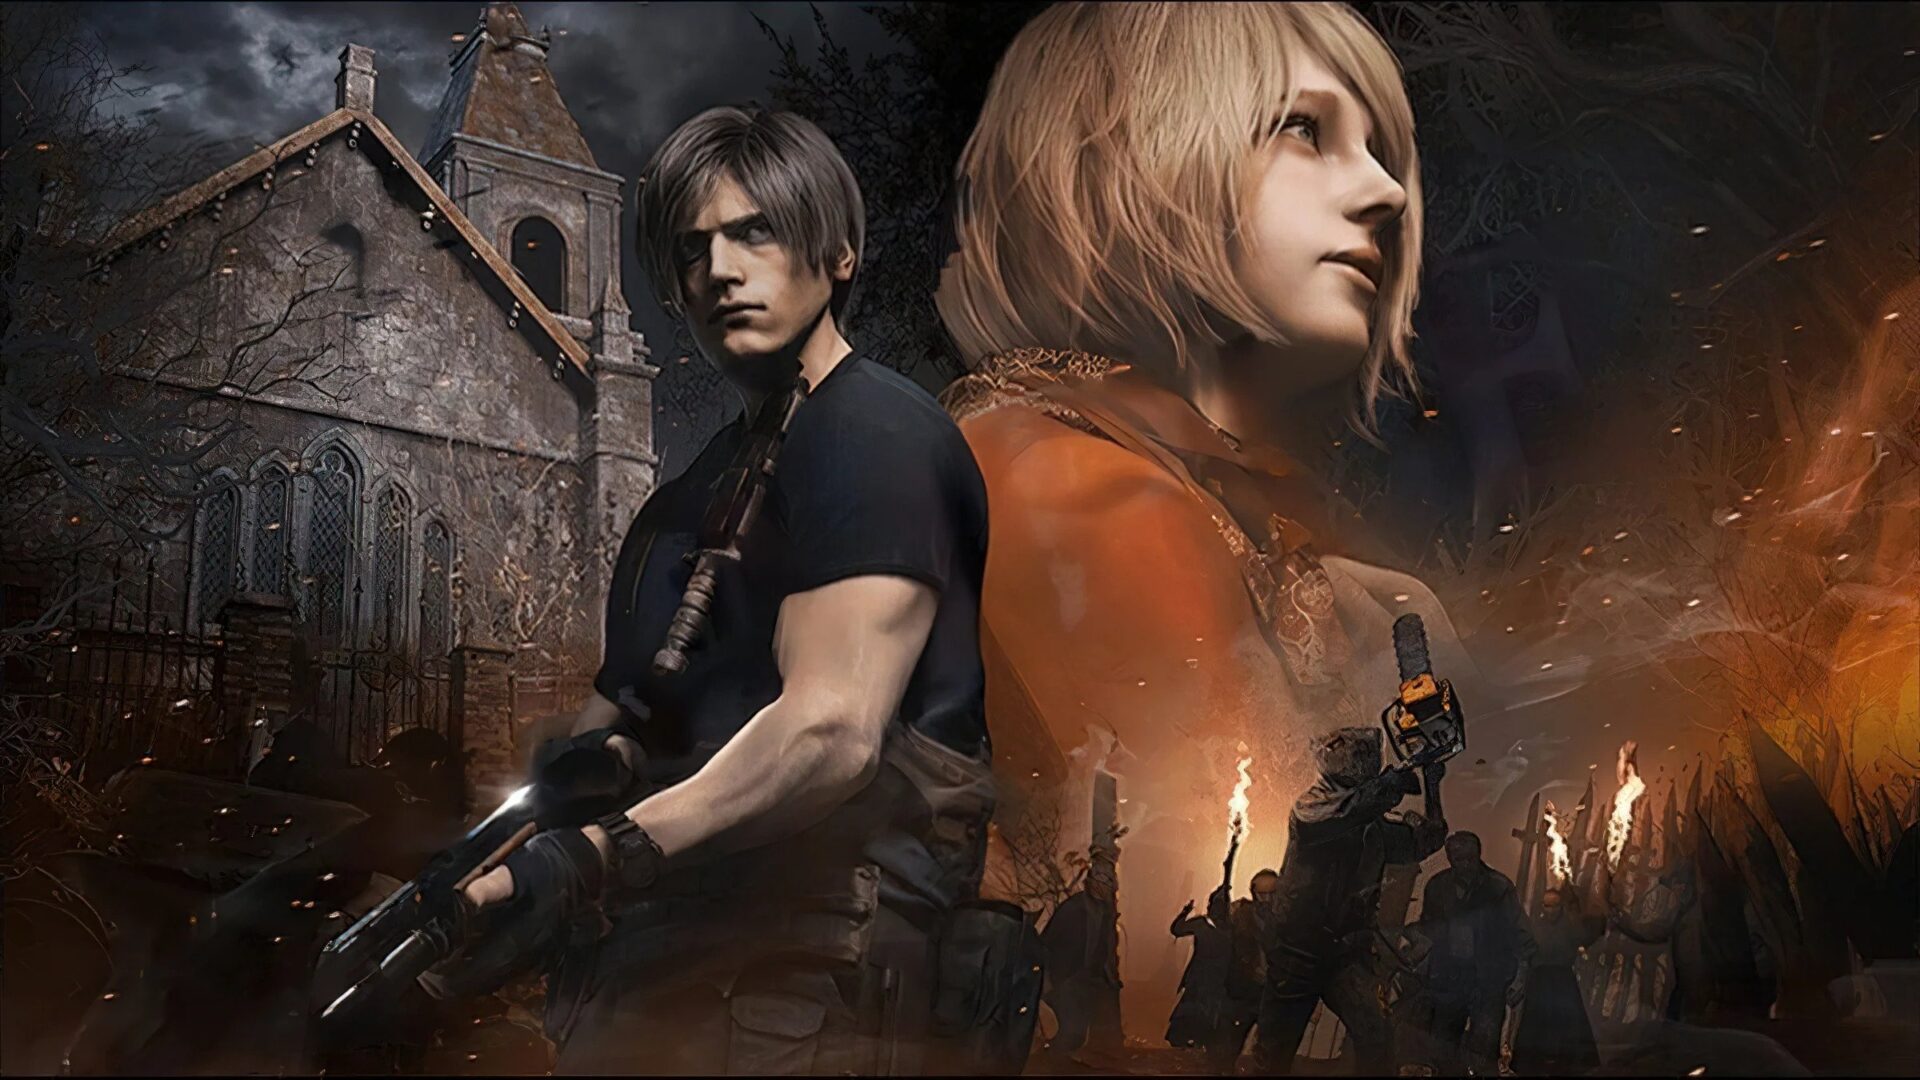 Resident Evil 4 (Remake) Review - Refinement, Not Reinvention